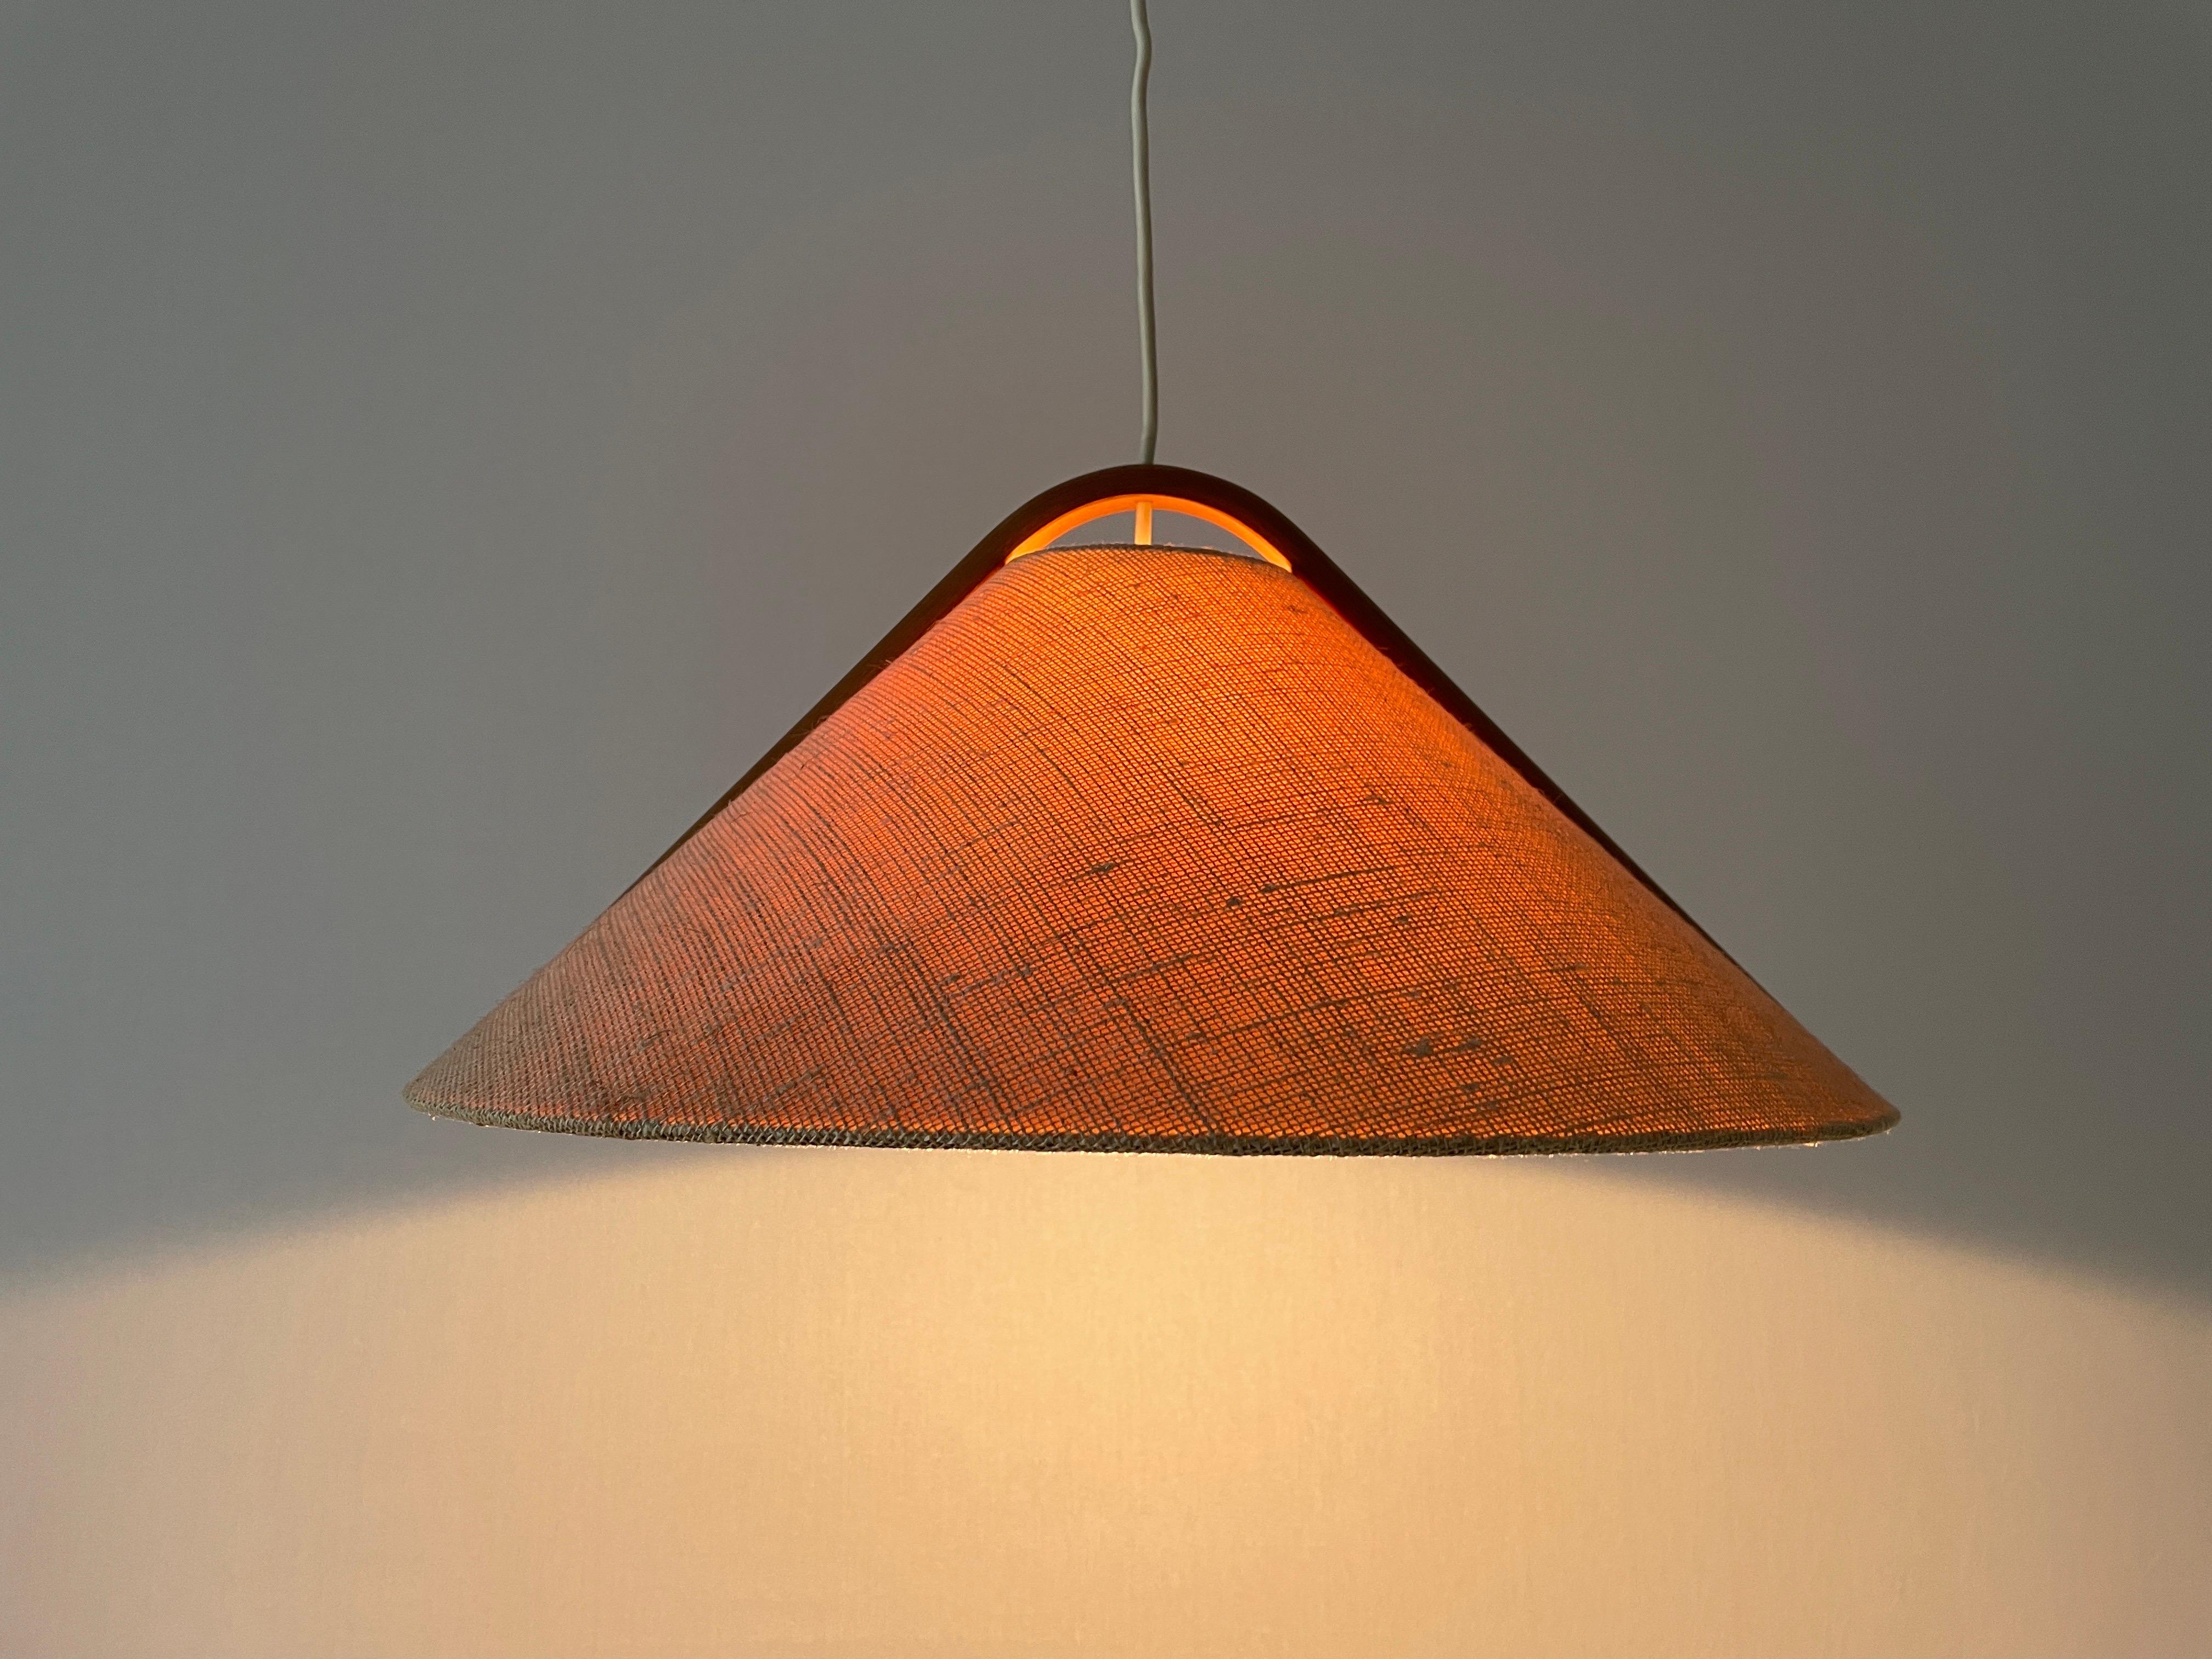 Conic Design Fabric Pendant Lamp with Teak Detail, 1960s, Germany For Sale 4